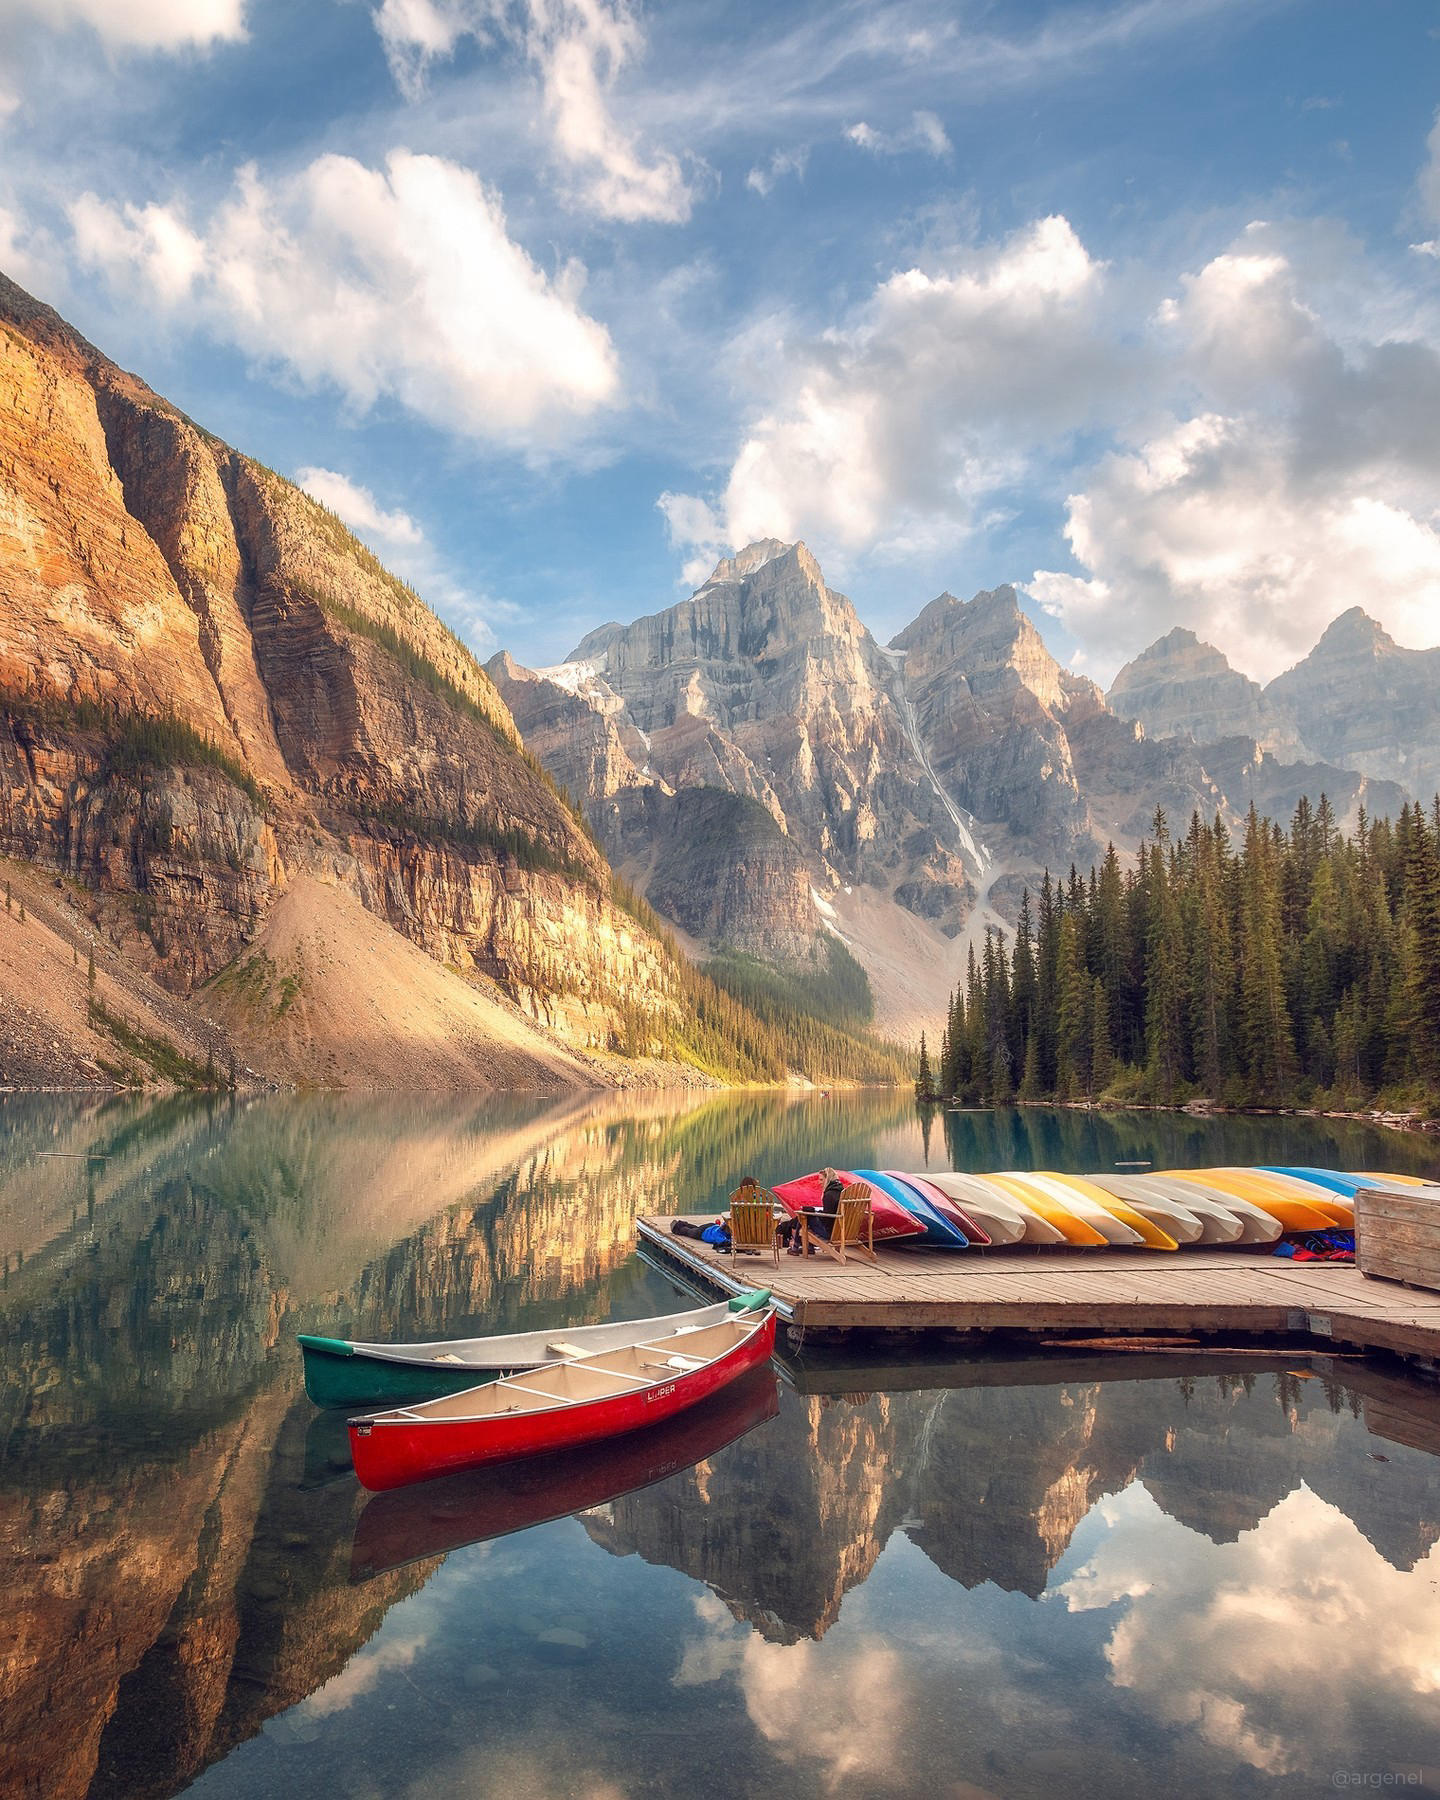 image  1 Passion Passport - Visit Moraine Lake, nestled in the striking Valley of the Ten Peaks, Once feature